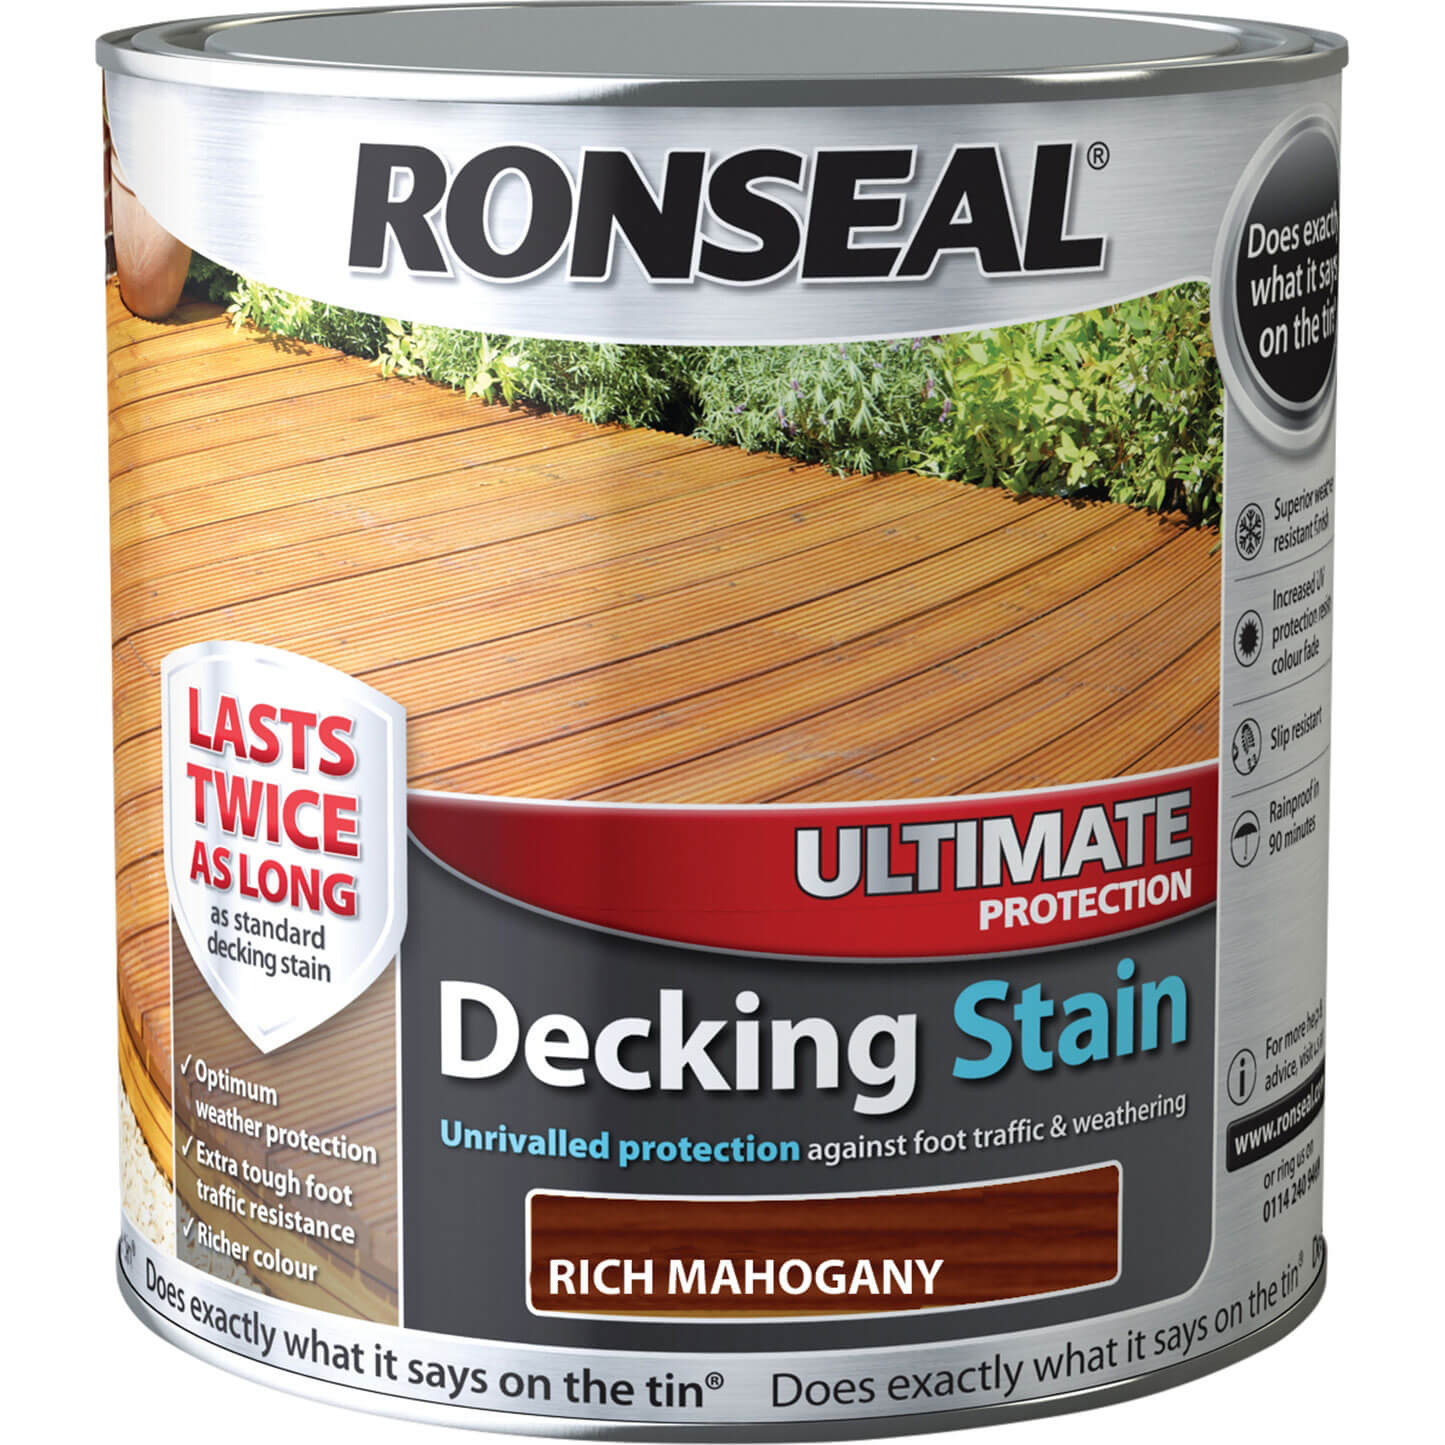 Ronseal Ultimate Protection Decking Stain Rich Mahogany 2.5l